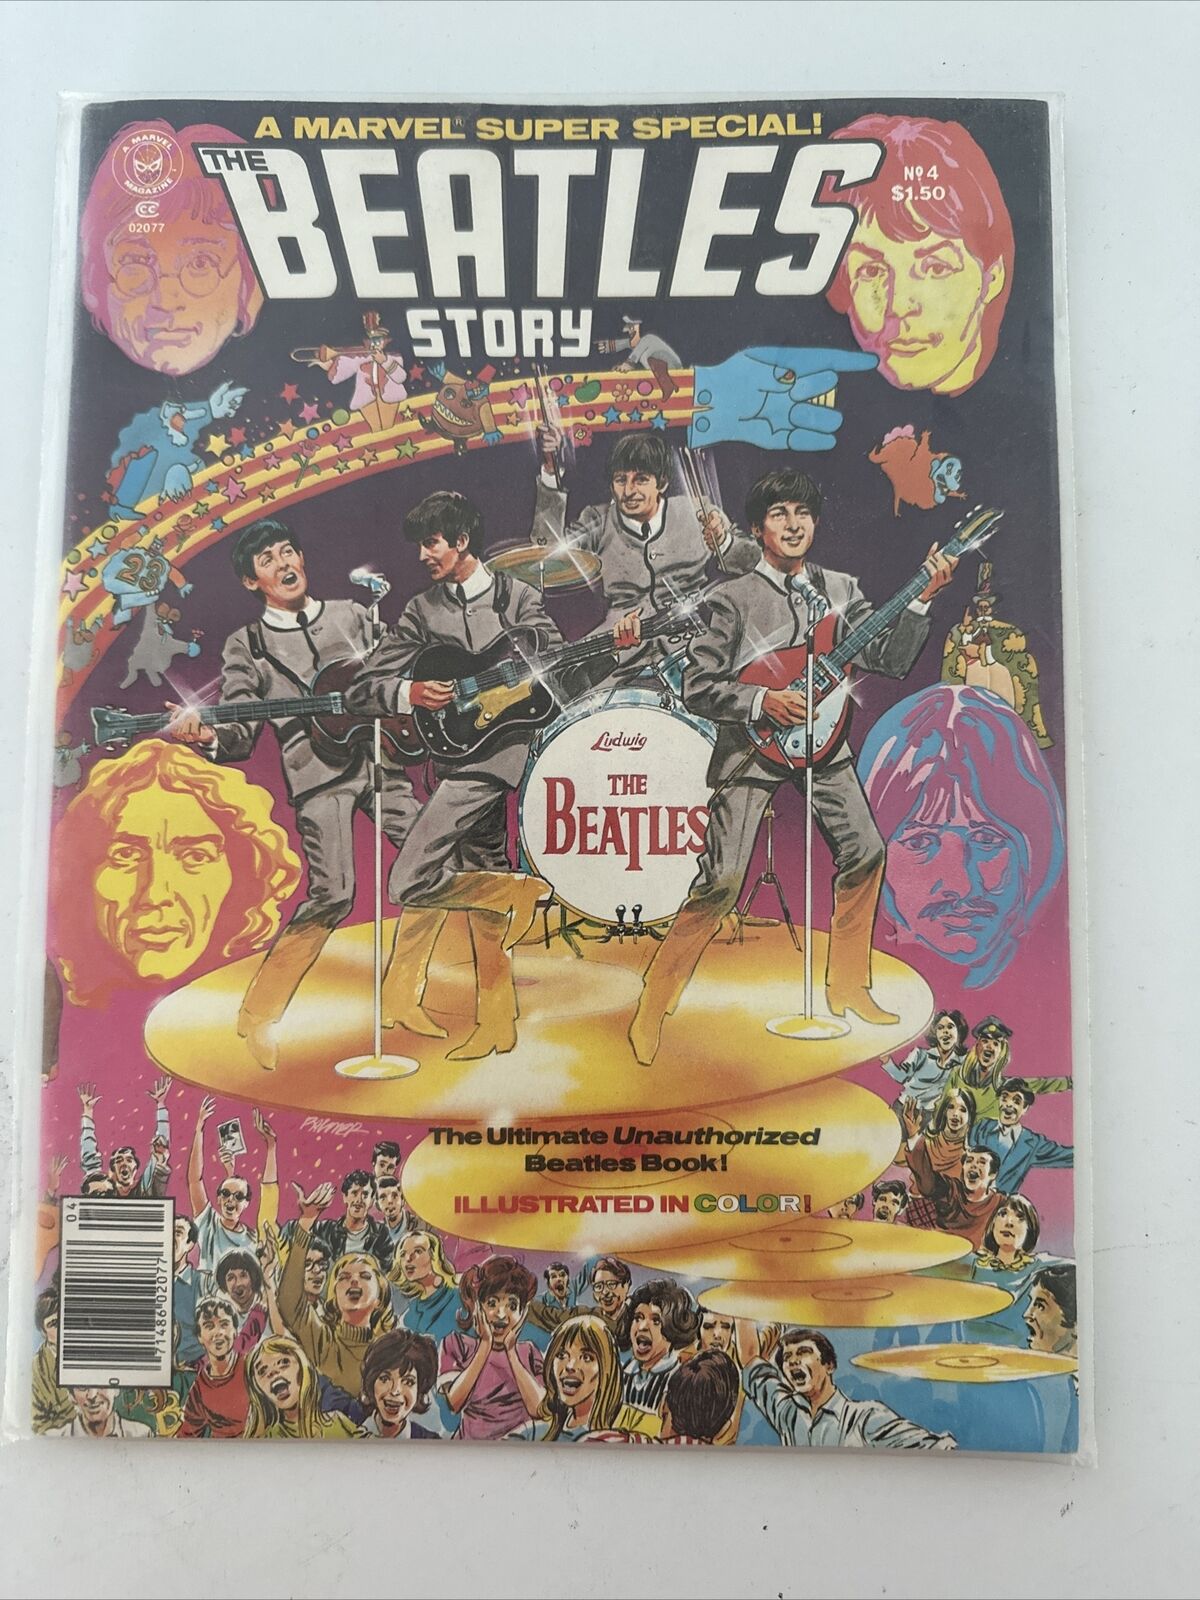 THE BEATLES STORY, 1978 Marvel Super Special #4. Collectors special.